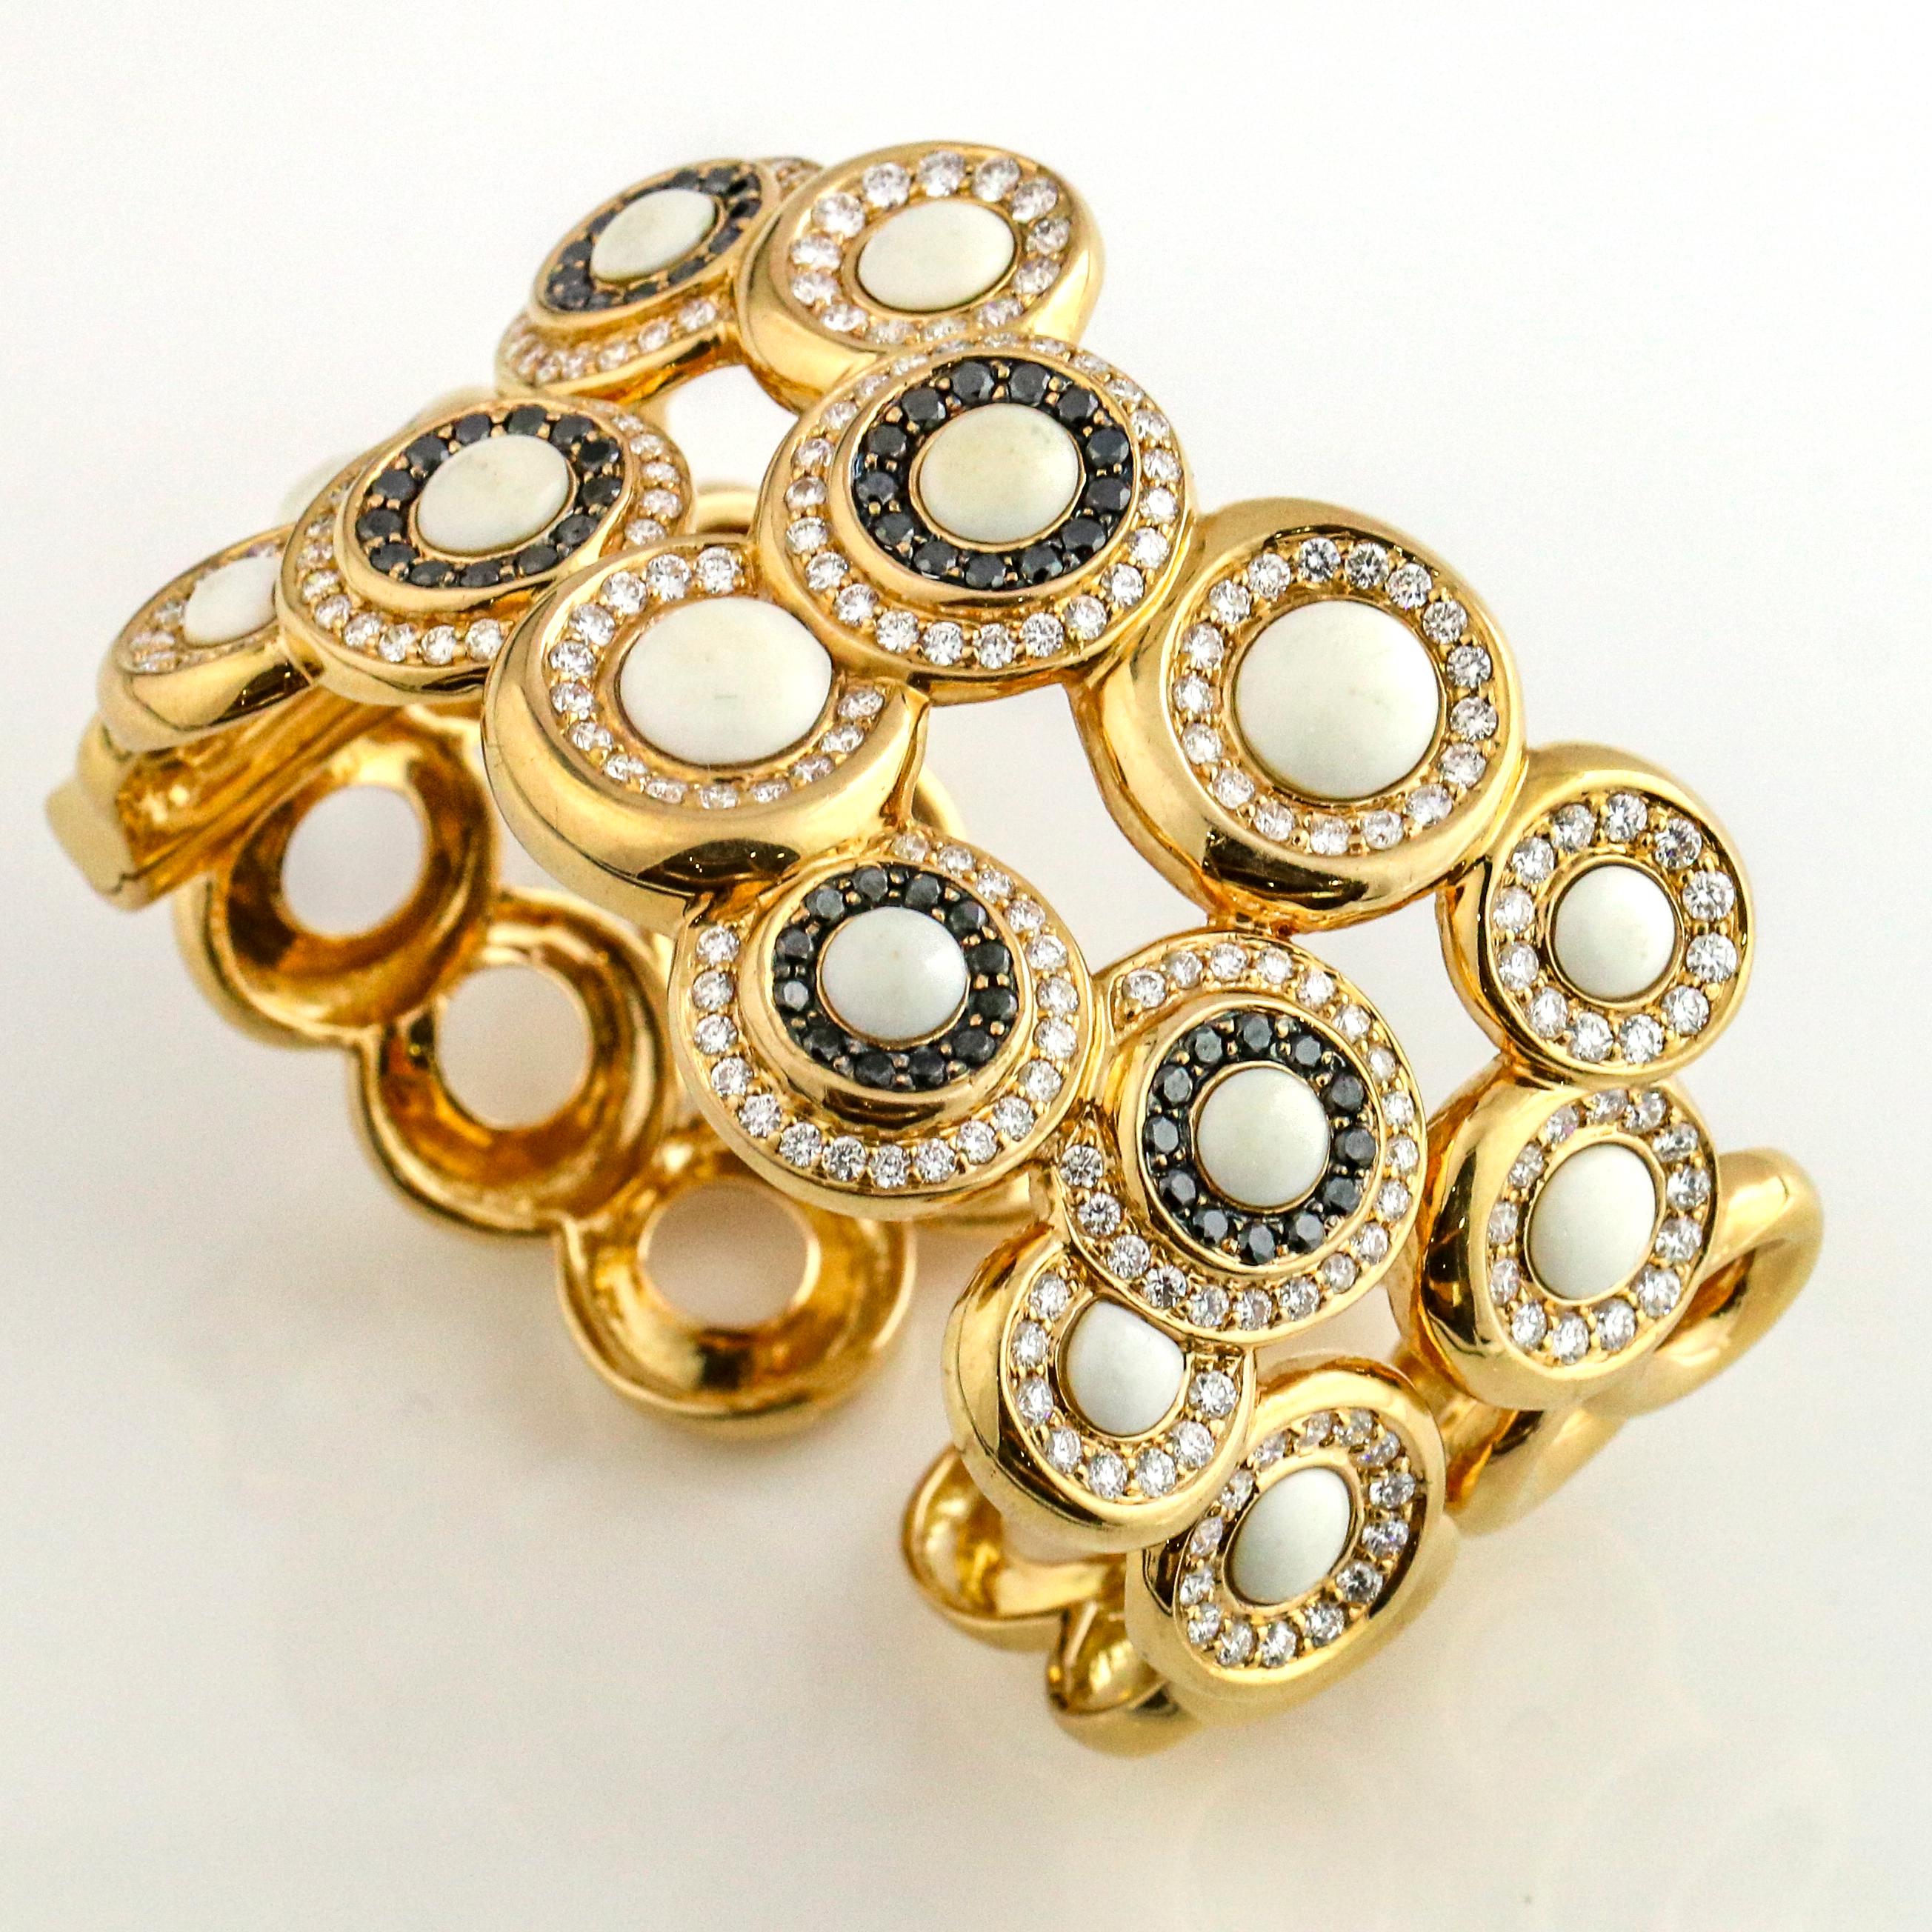 Wide fashion bangle bracelet in 18 karat yellow gold with white coral stones surrounded by black and white round-cut diamonds. Made in Italy. Signed * 1608 MI.